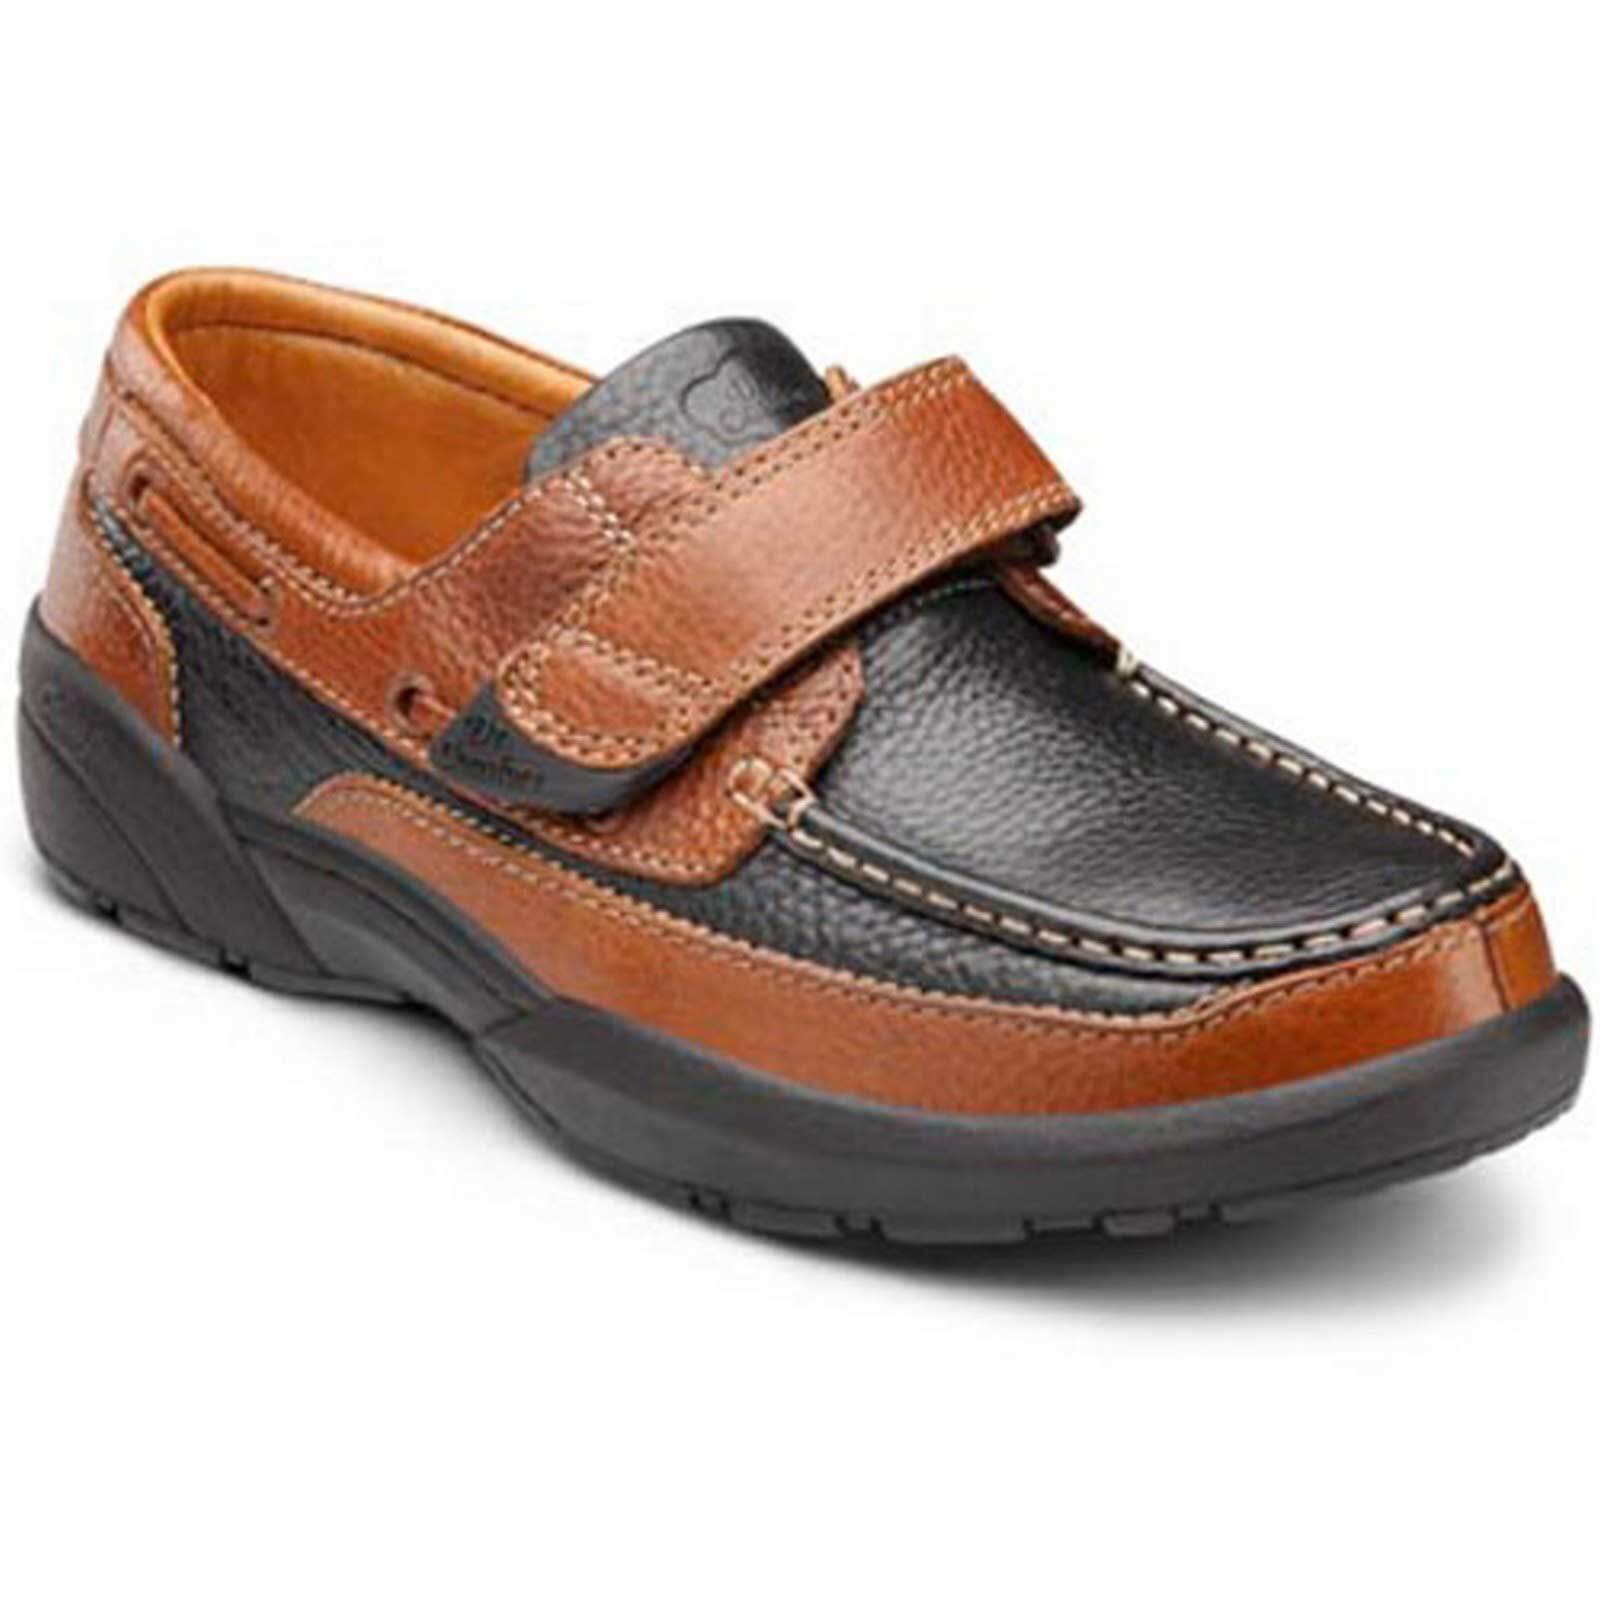 Dr. Comfort Shoes Mike - Men's Comfort Therapeutic Diabetic Shoe With Gel Plus Inserts - Casual - Medium - Extra Wide - Extra Depth For Orthotics